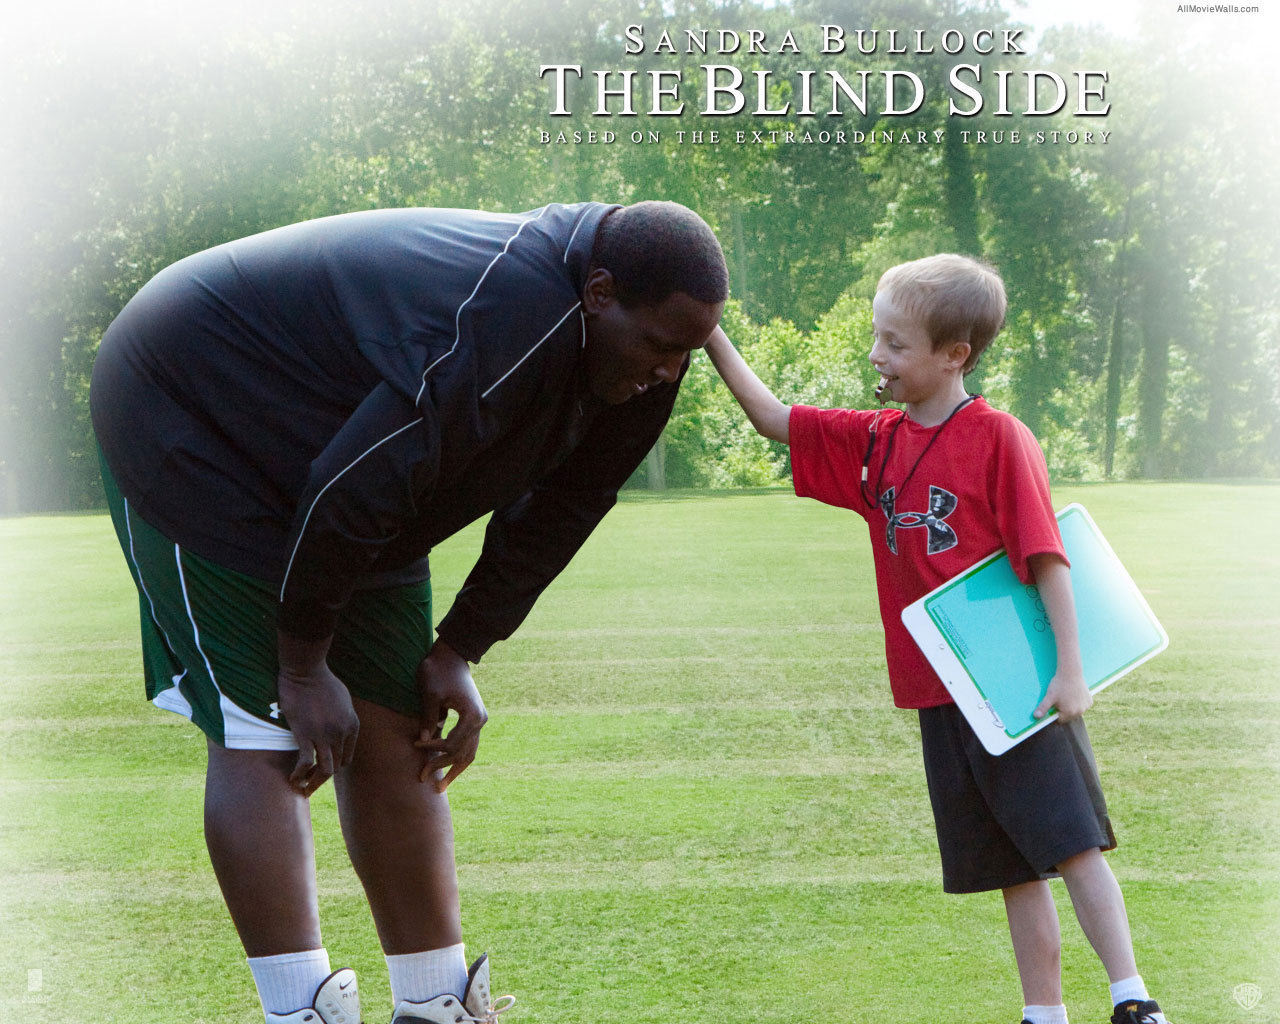 The Blind Side movies in Australia